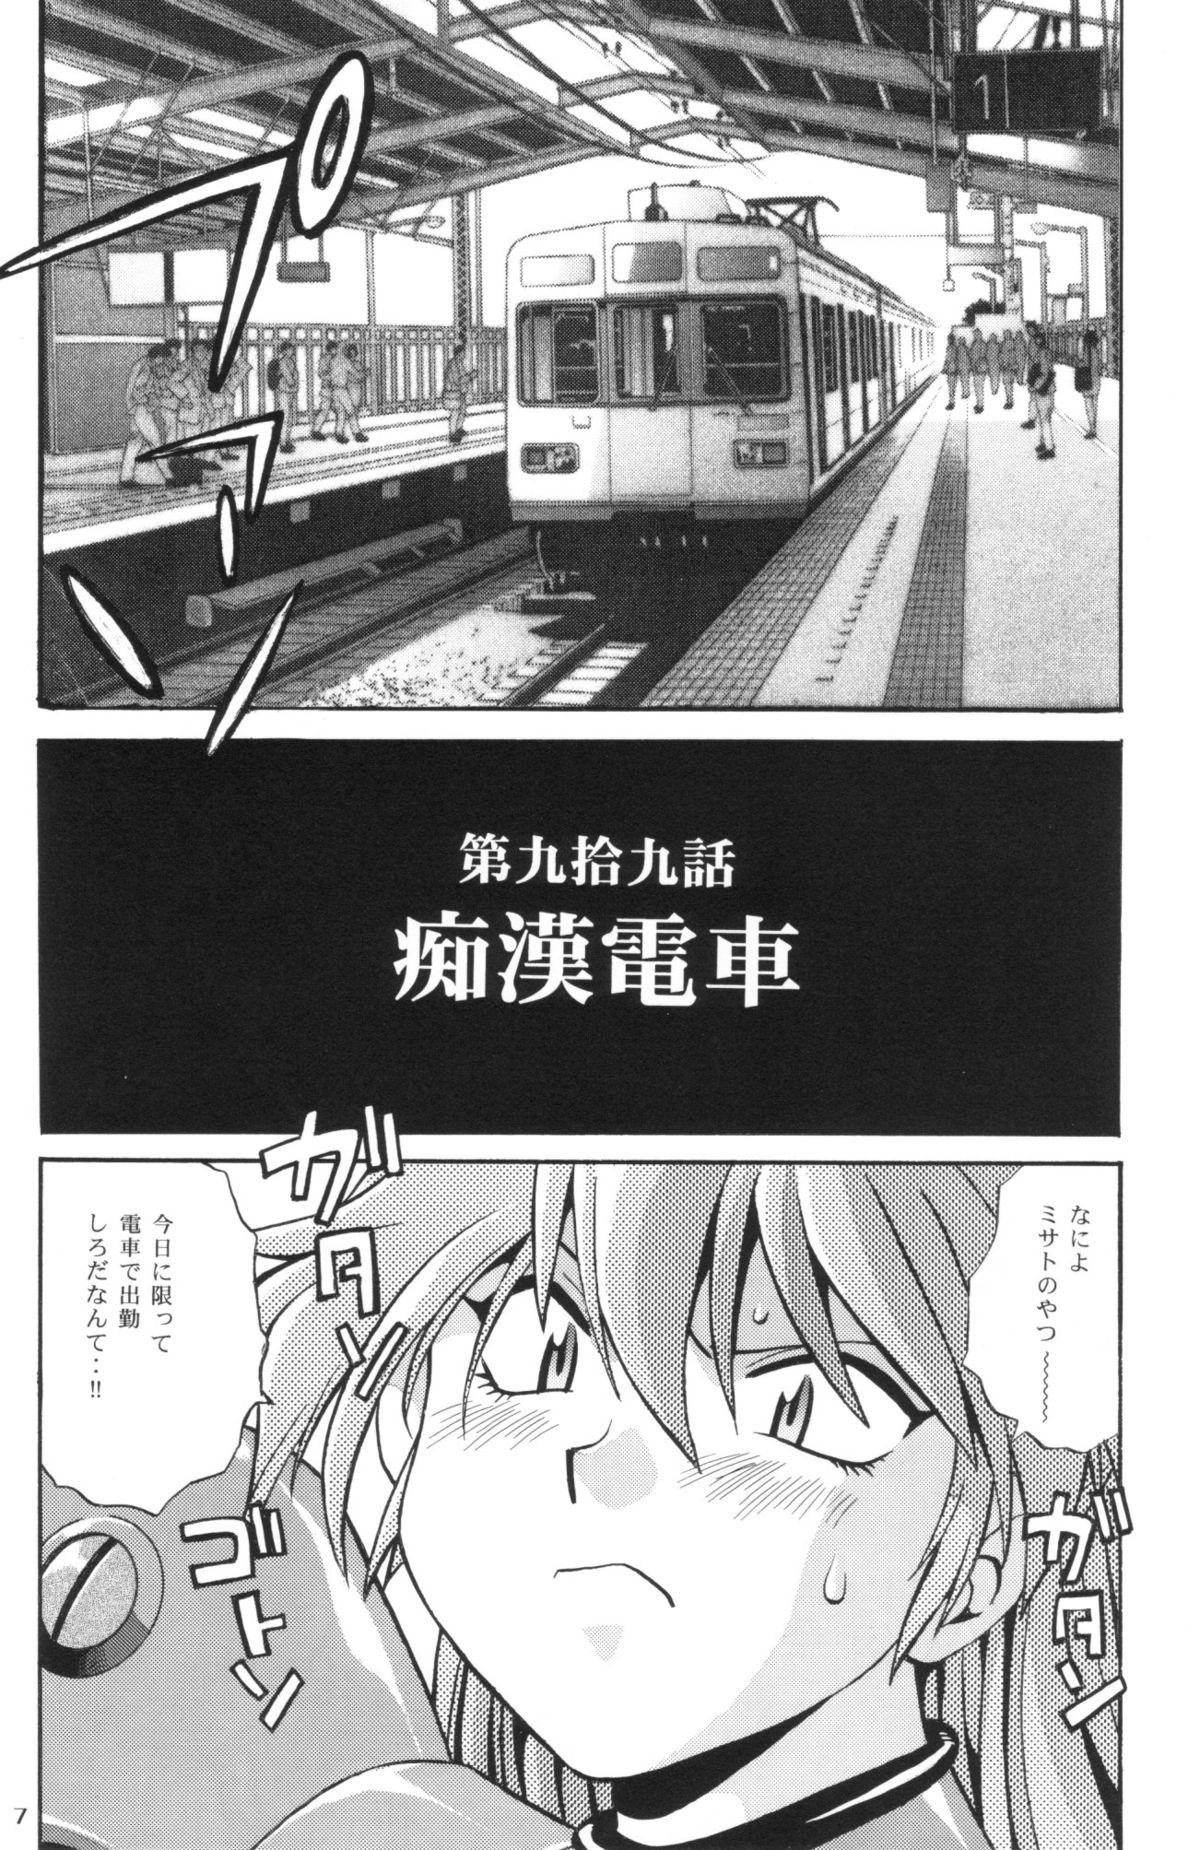 Pounded Plug Suit Fetish In Chikan Densha - Neon genesis evangelion T Girl - Page 6